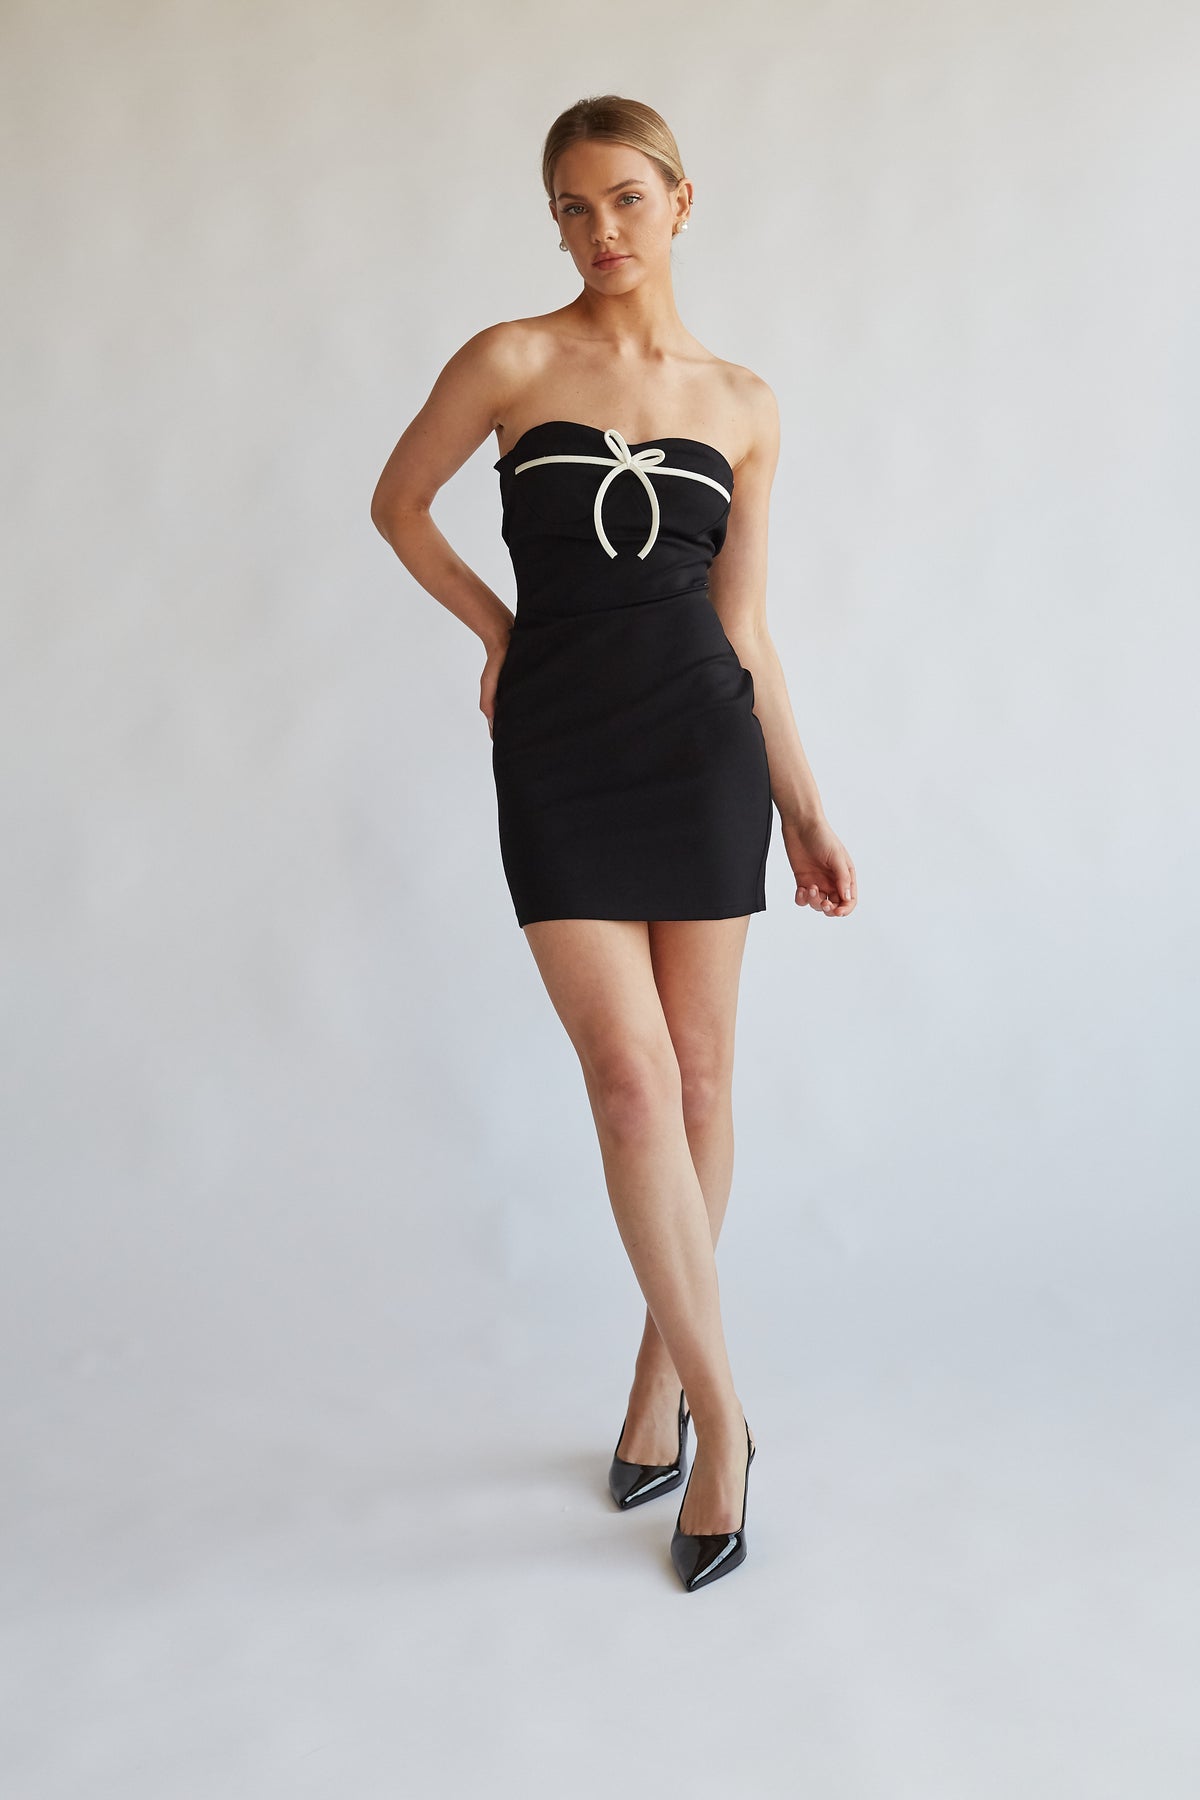 full body image of black mini dress with contrast white bow across bust | styled with pointed toe patent black pumps